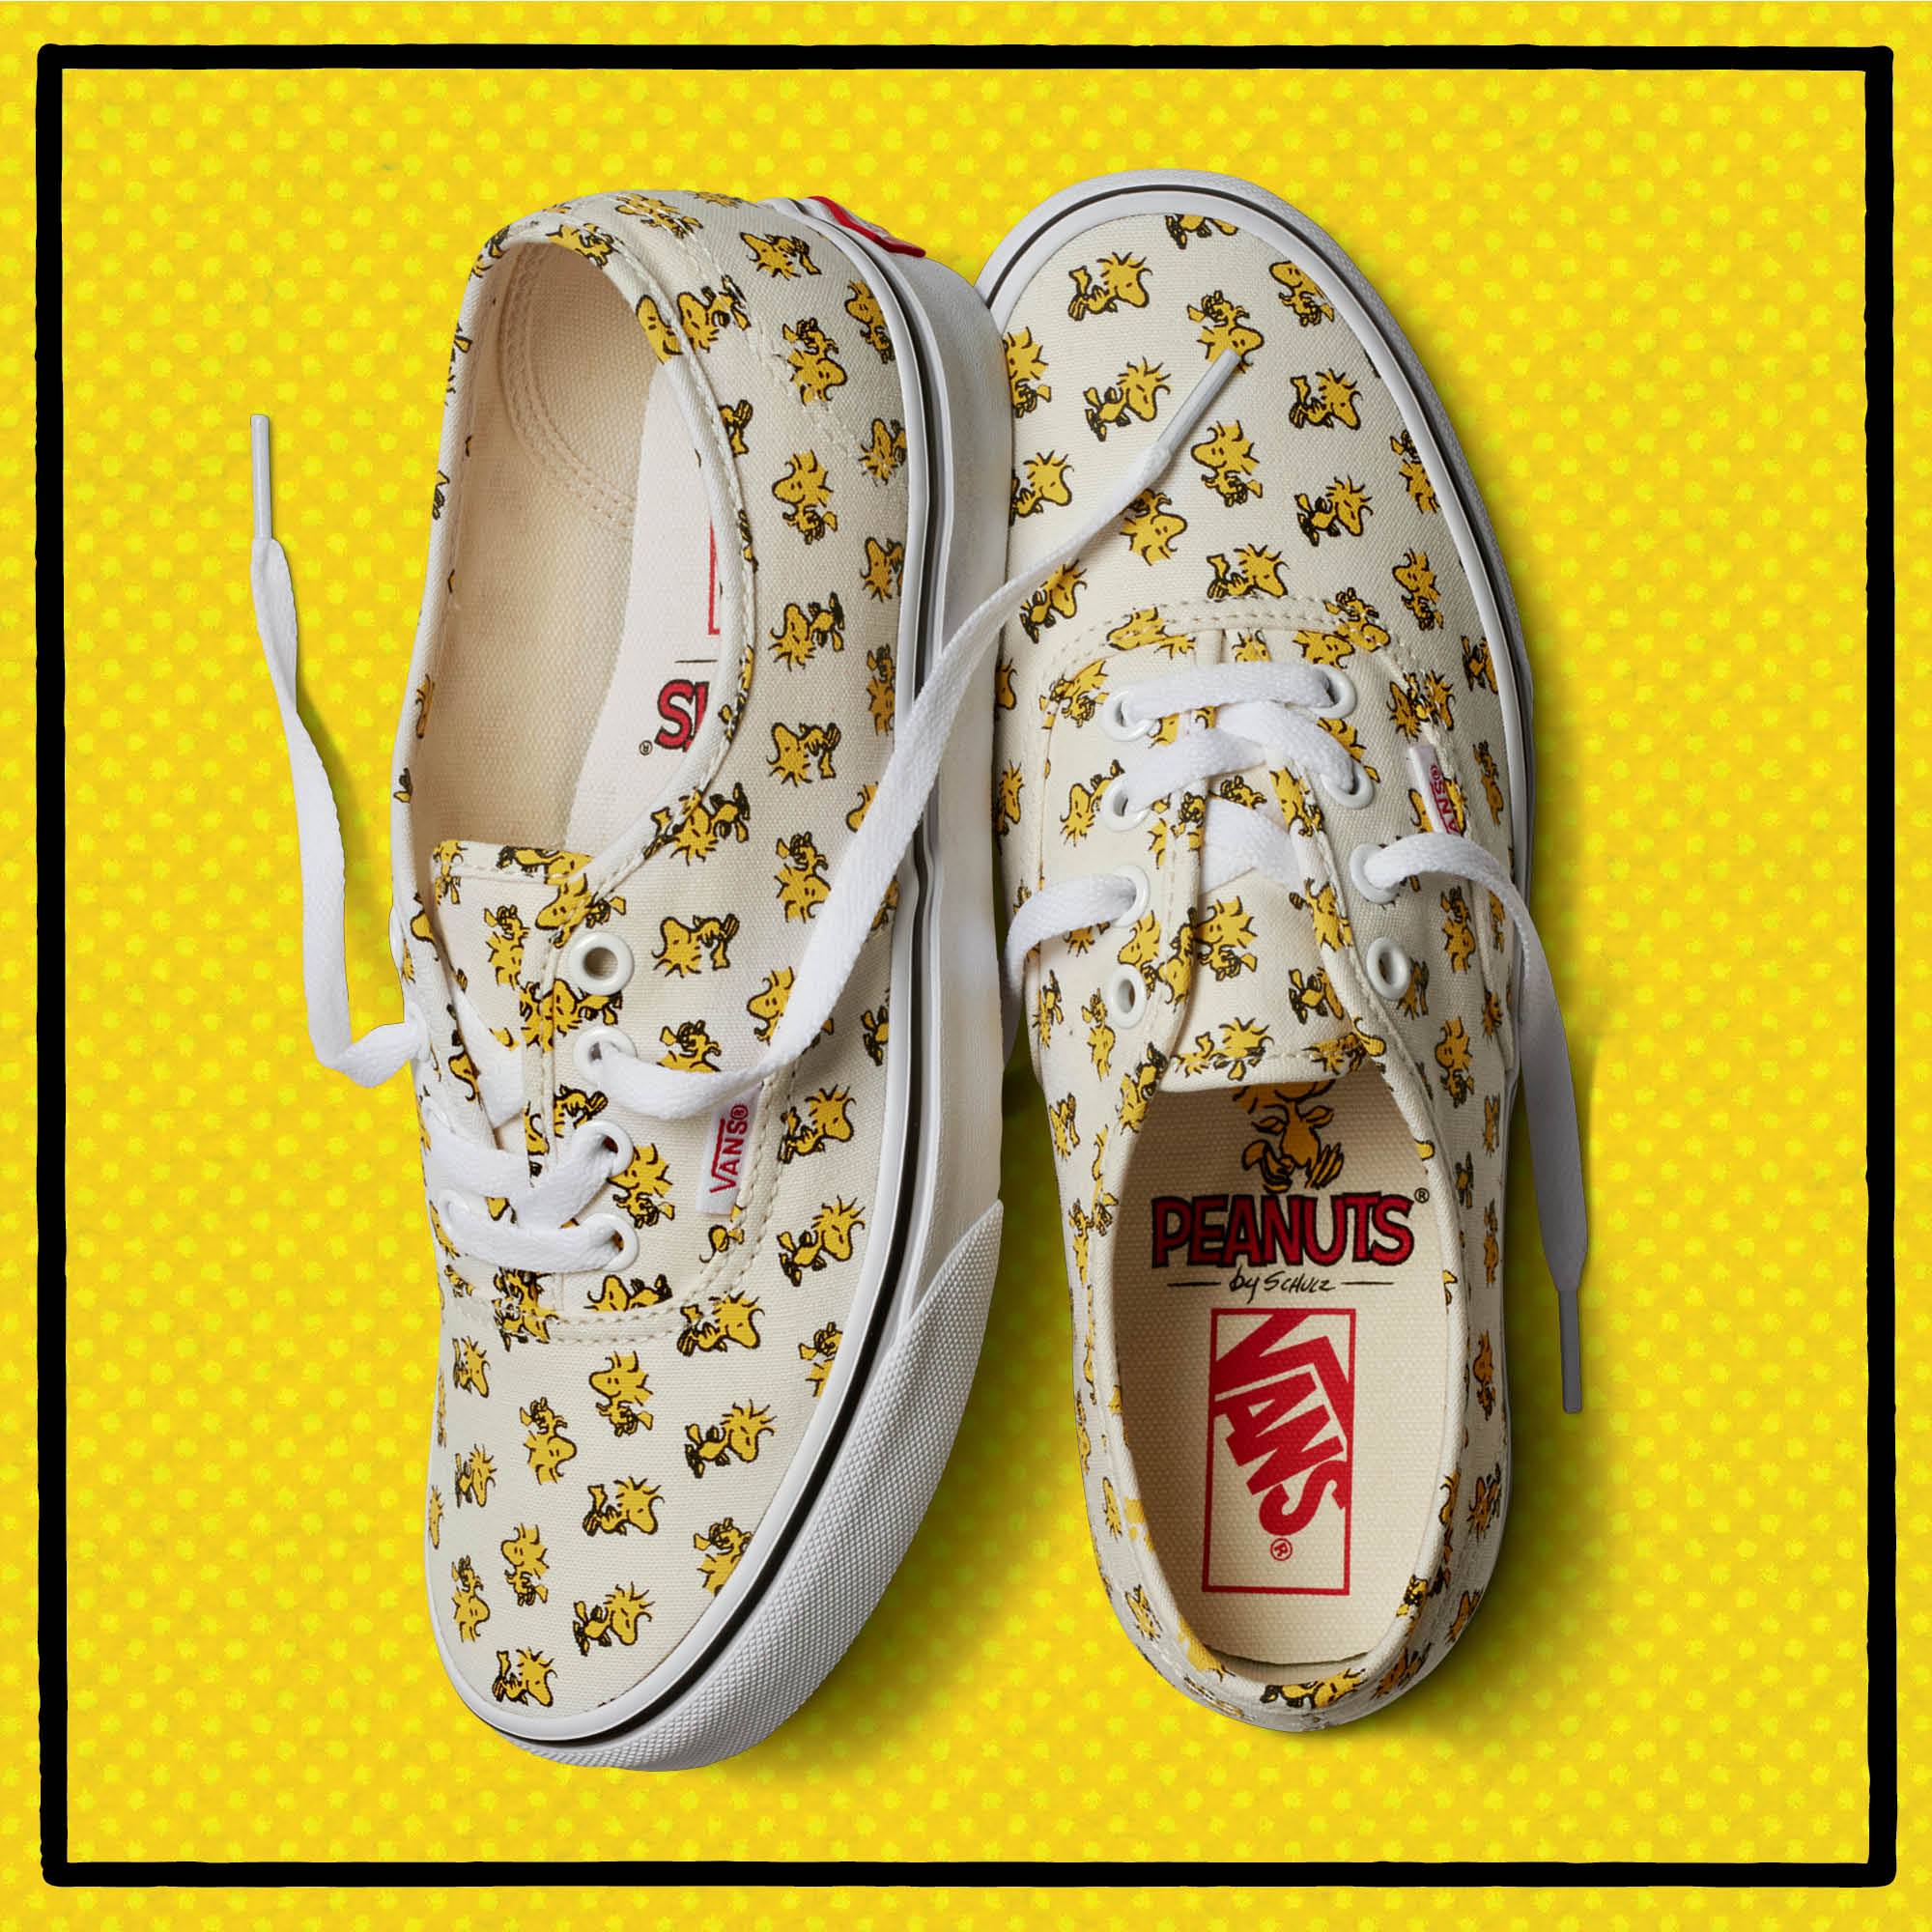 vans new peanuts collection